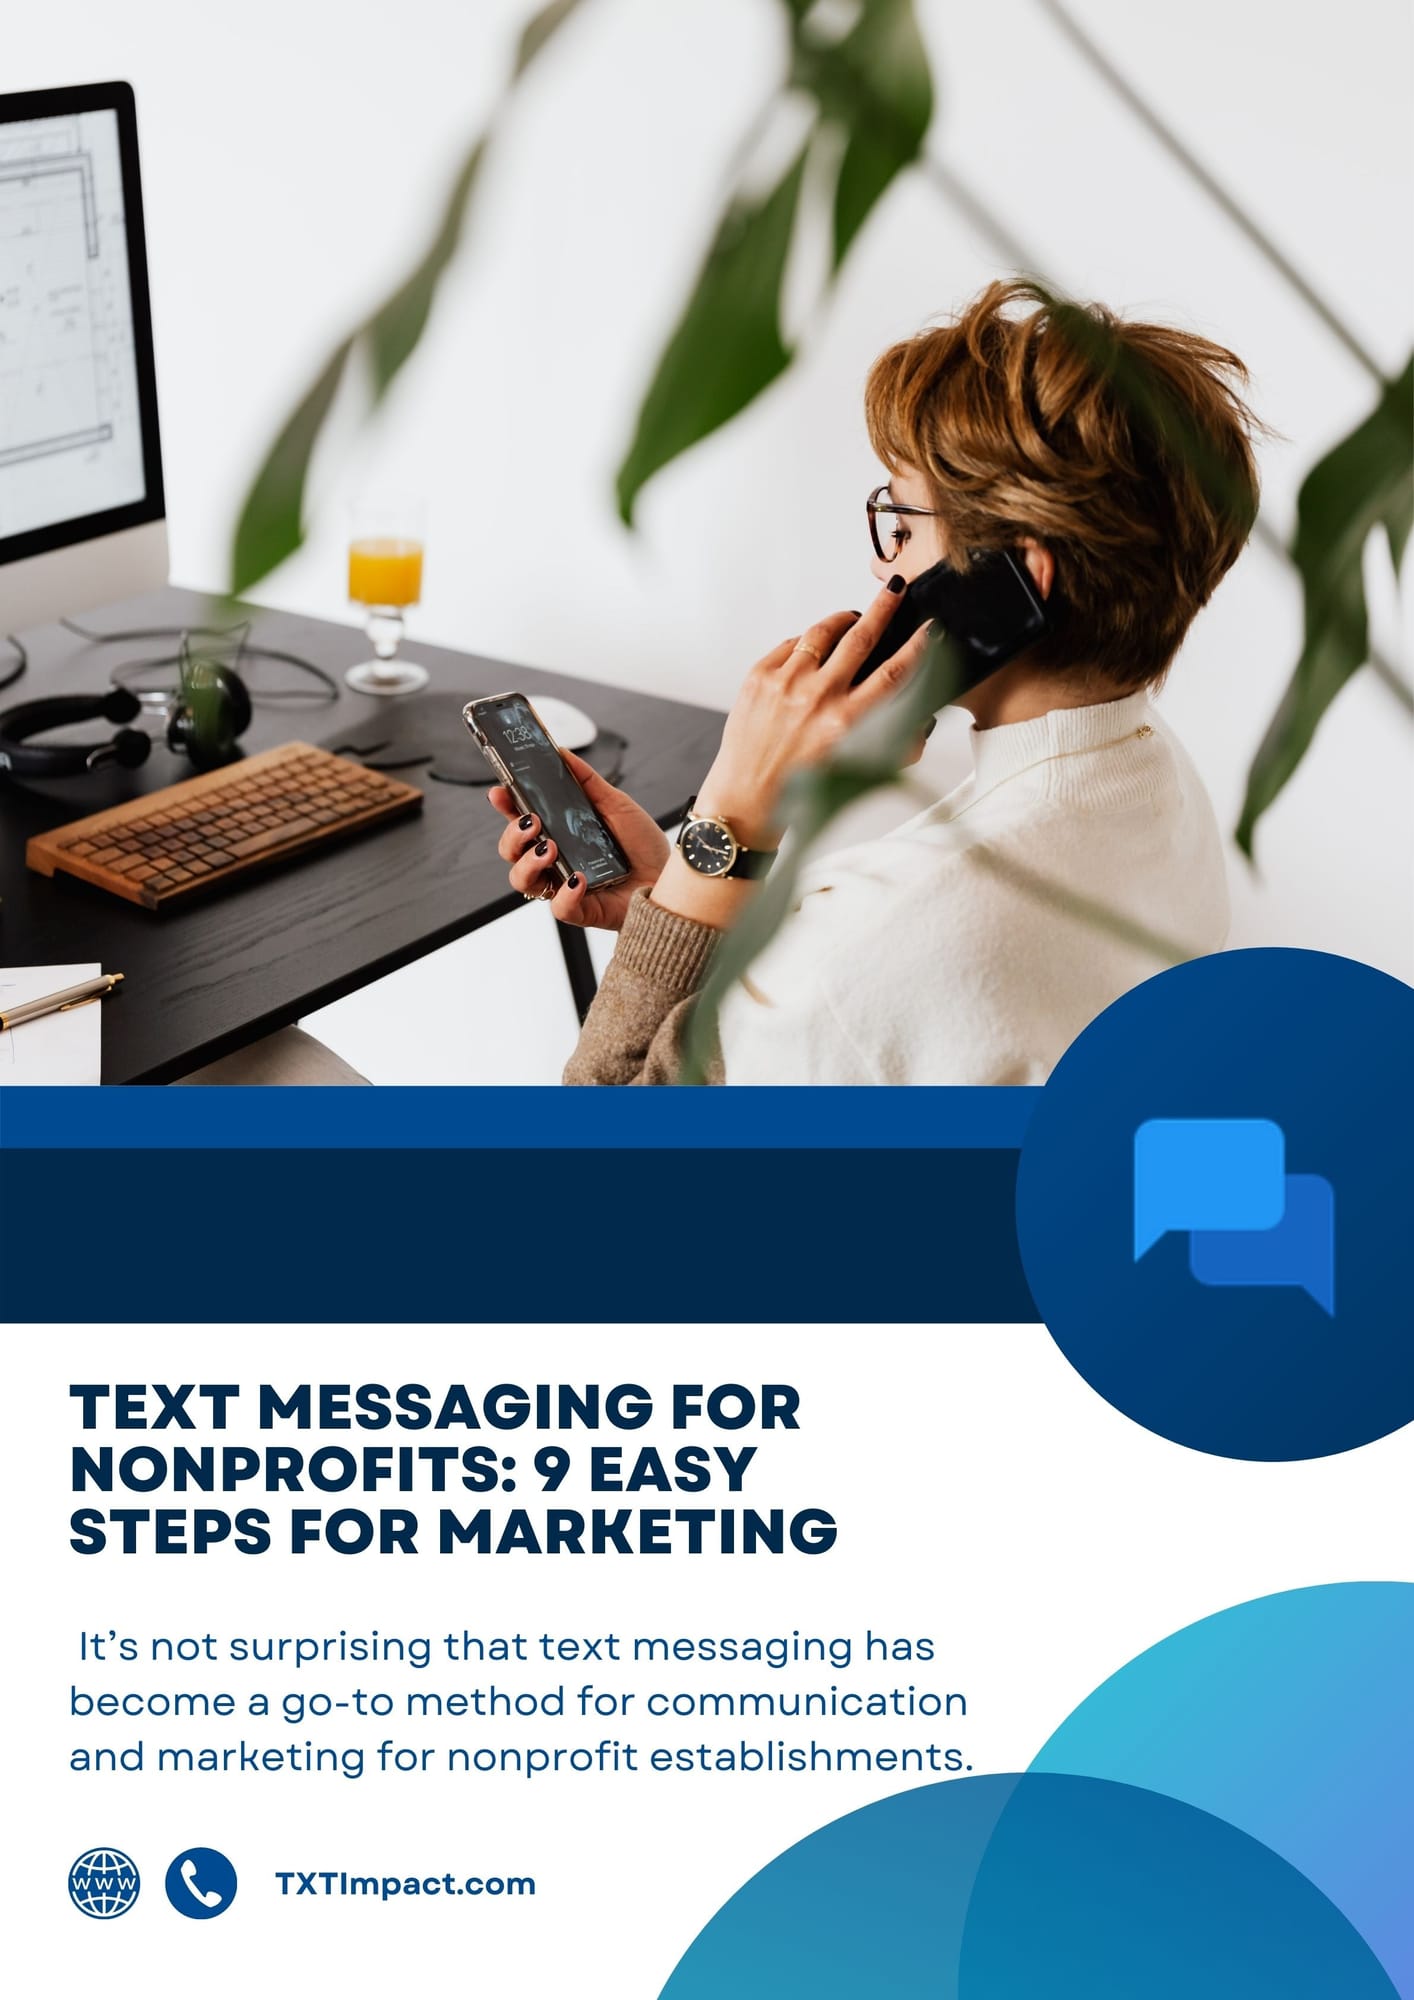 Text Messaging for Nonprofits 9 Easy Steps For Marketing.jpg